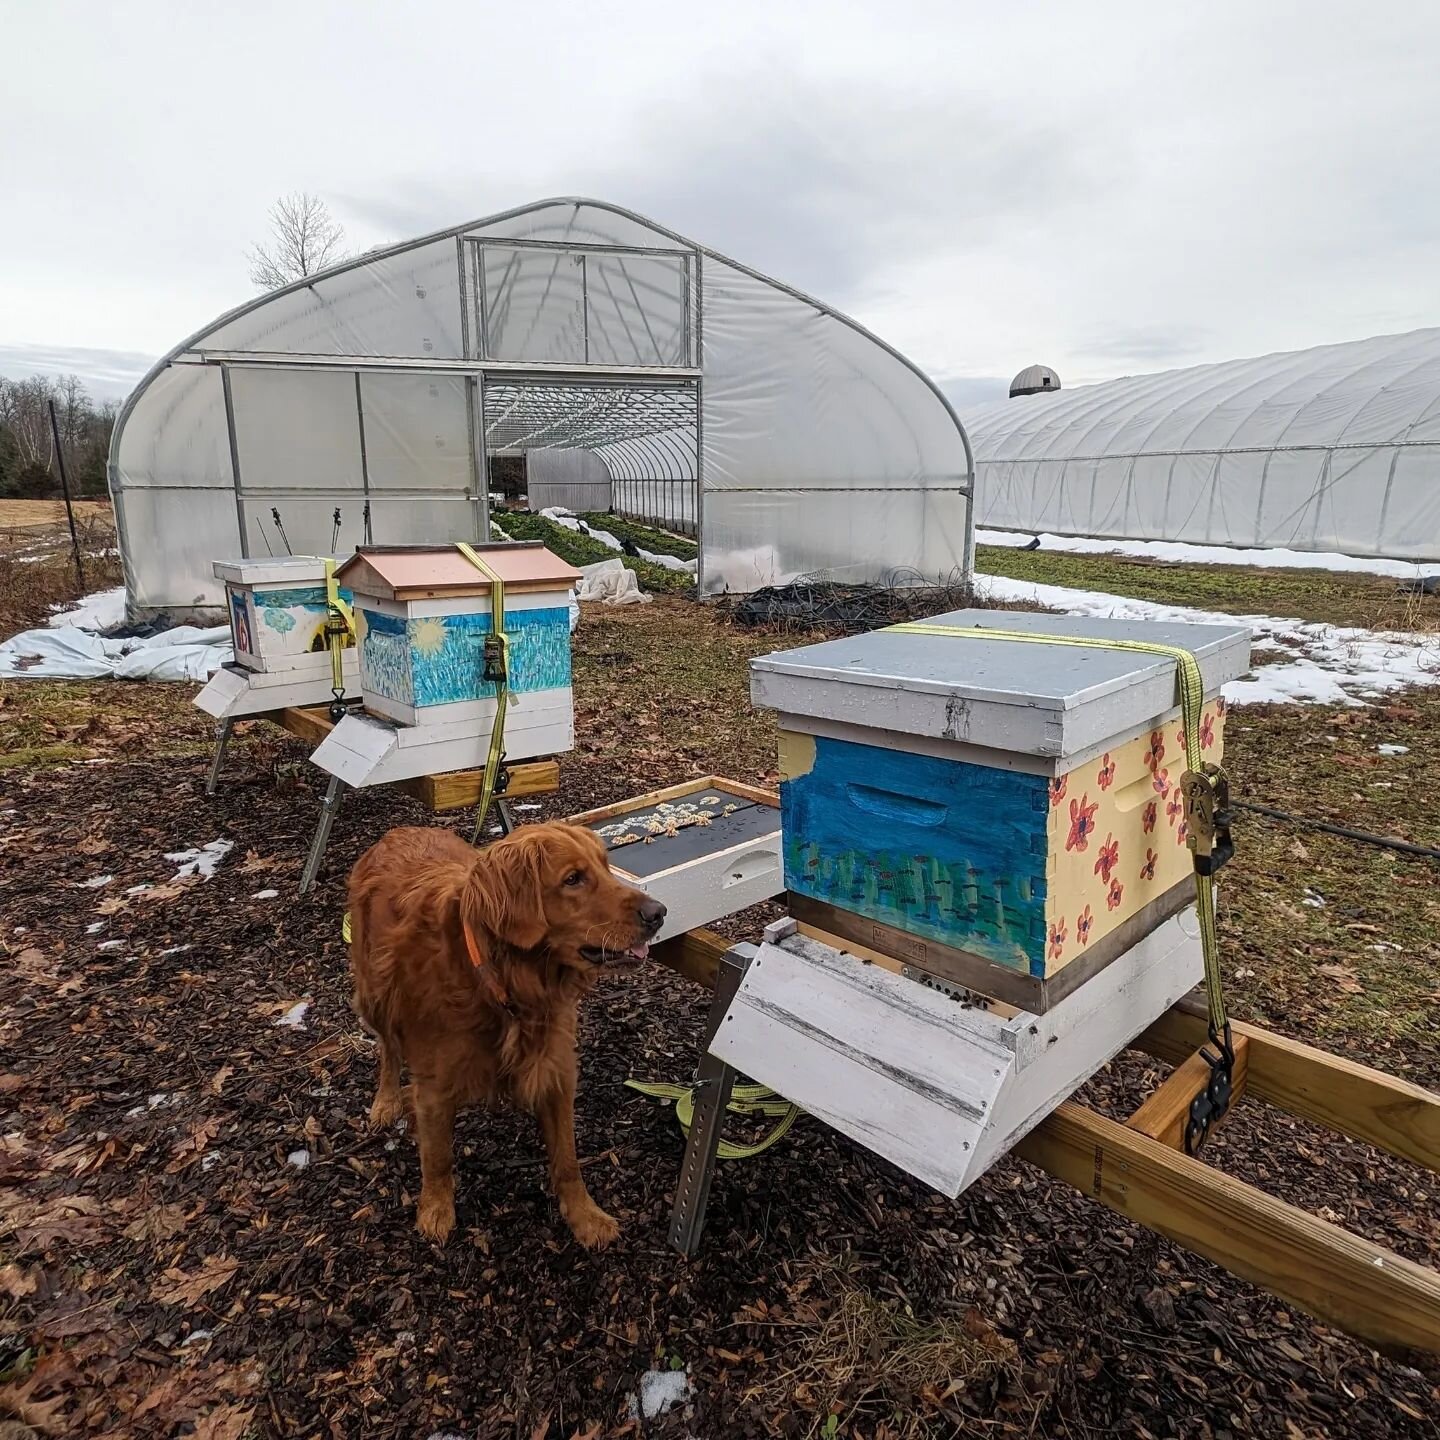 Honey bees are a wonderful addition to the farm. Winston and I regularly find ourselves at the hives, checking on them, watching the bees' comings and goings, hovering around Mike @larkhoneyco while he is doing his thing and graciously explaining his